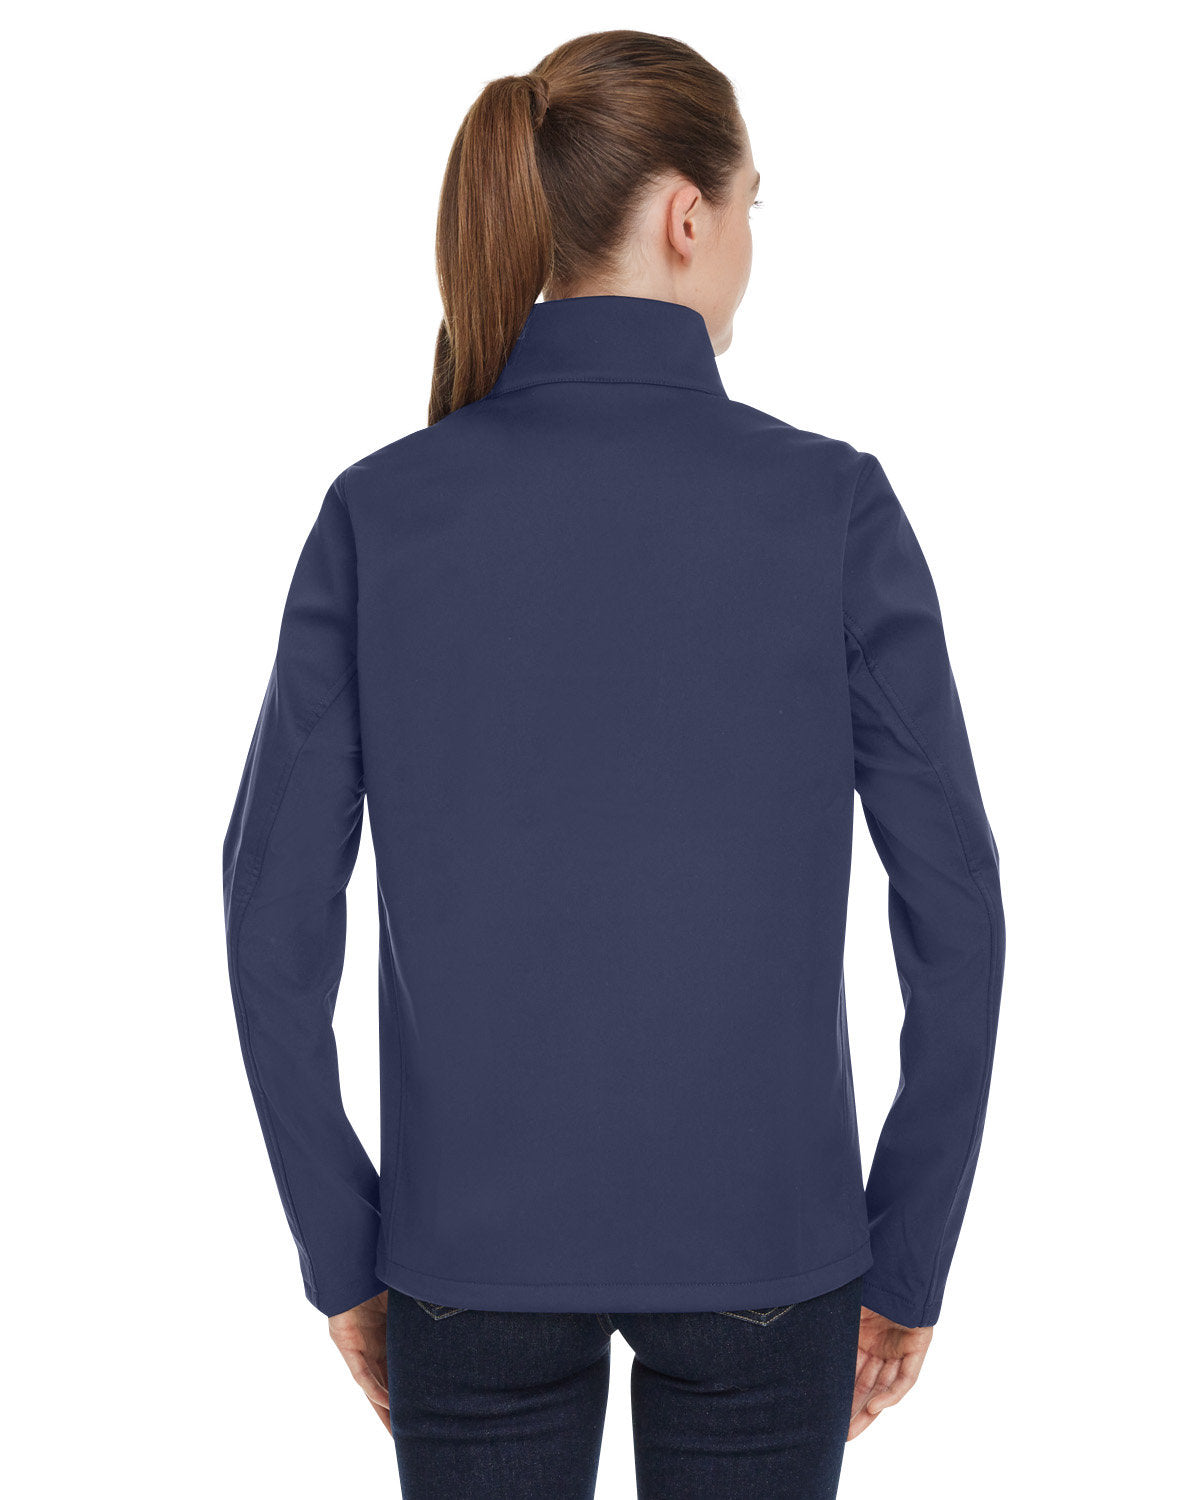 Under Armour Ladies ColdGear InfraRed Shield Branded Jackets, Navy